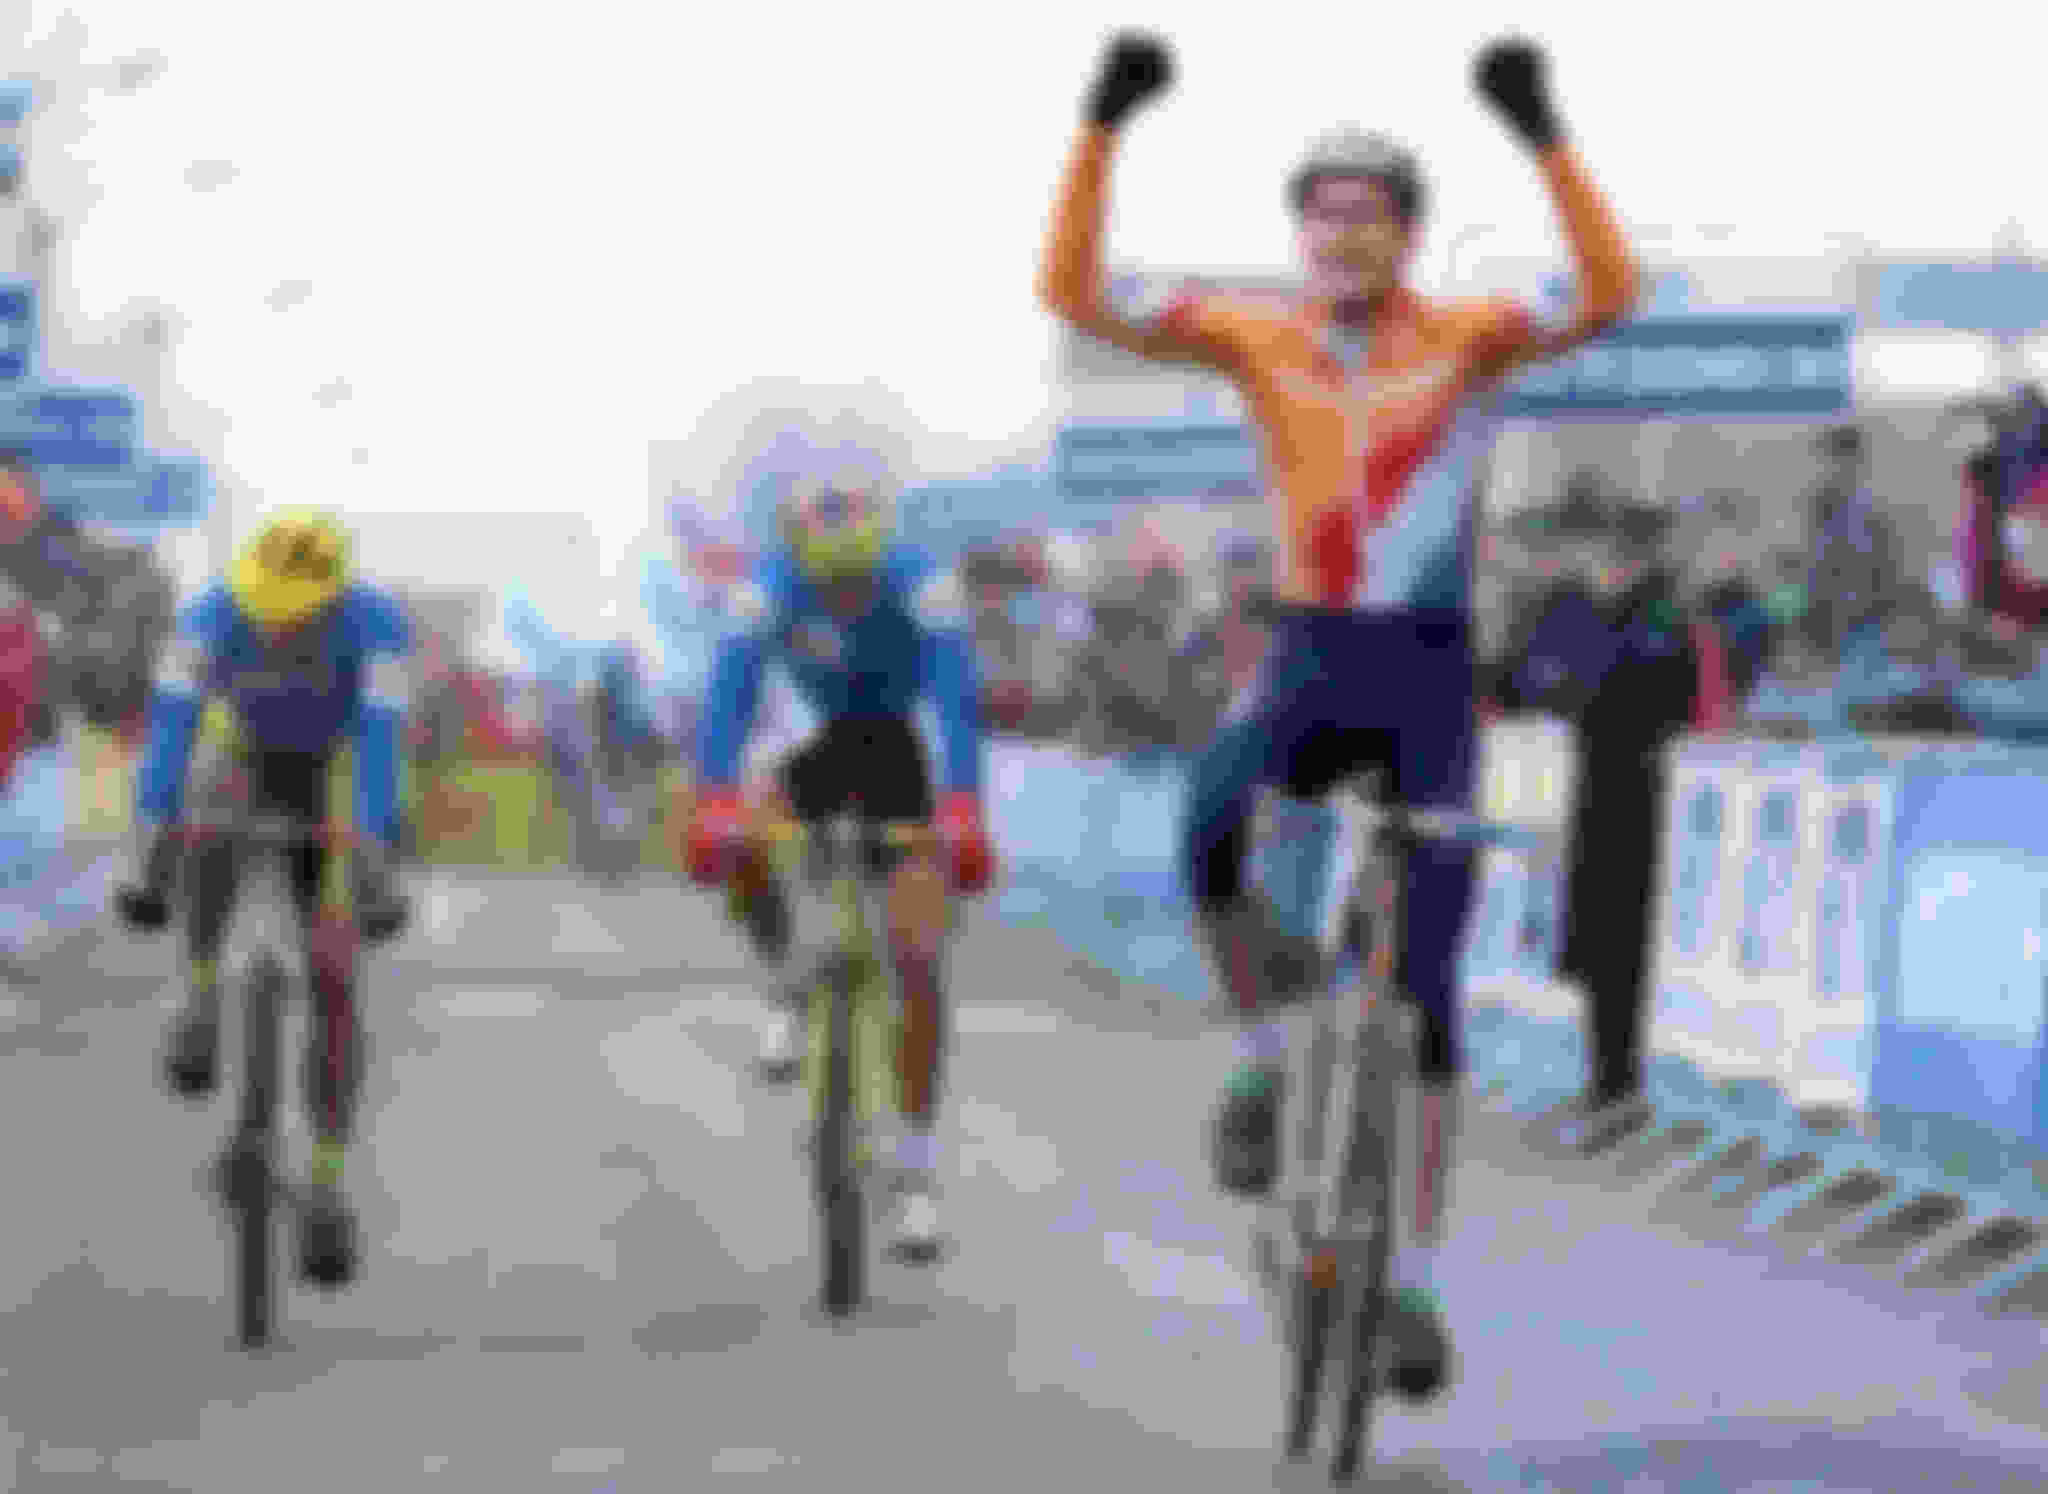 Adri van der Poel wins the Elite Men's race at the 1996 World Cyclo-cross Championships in Montreuil, France